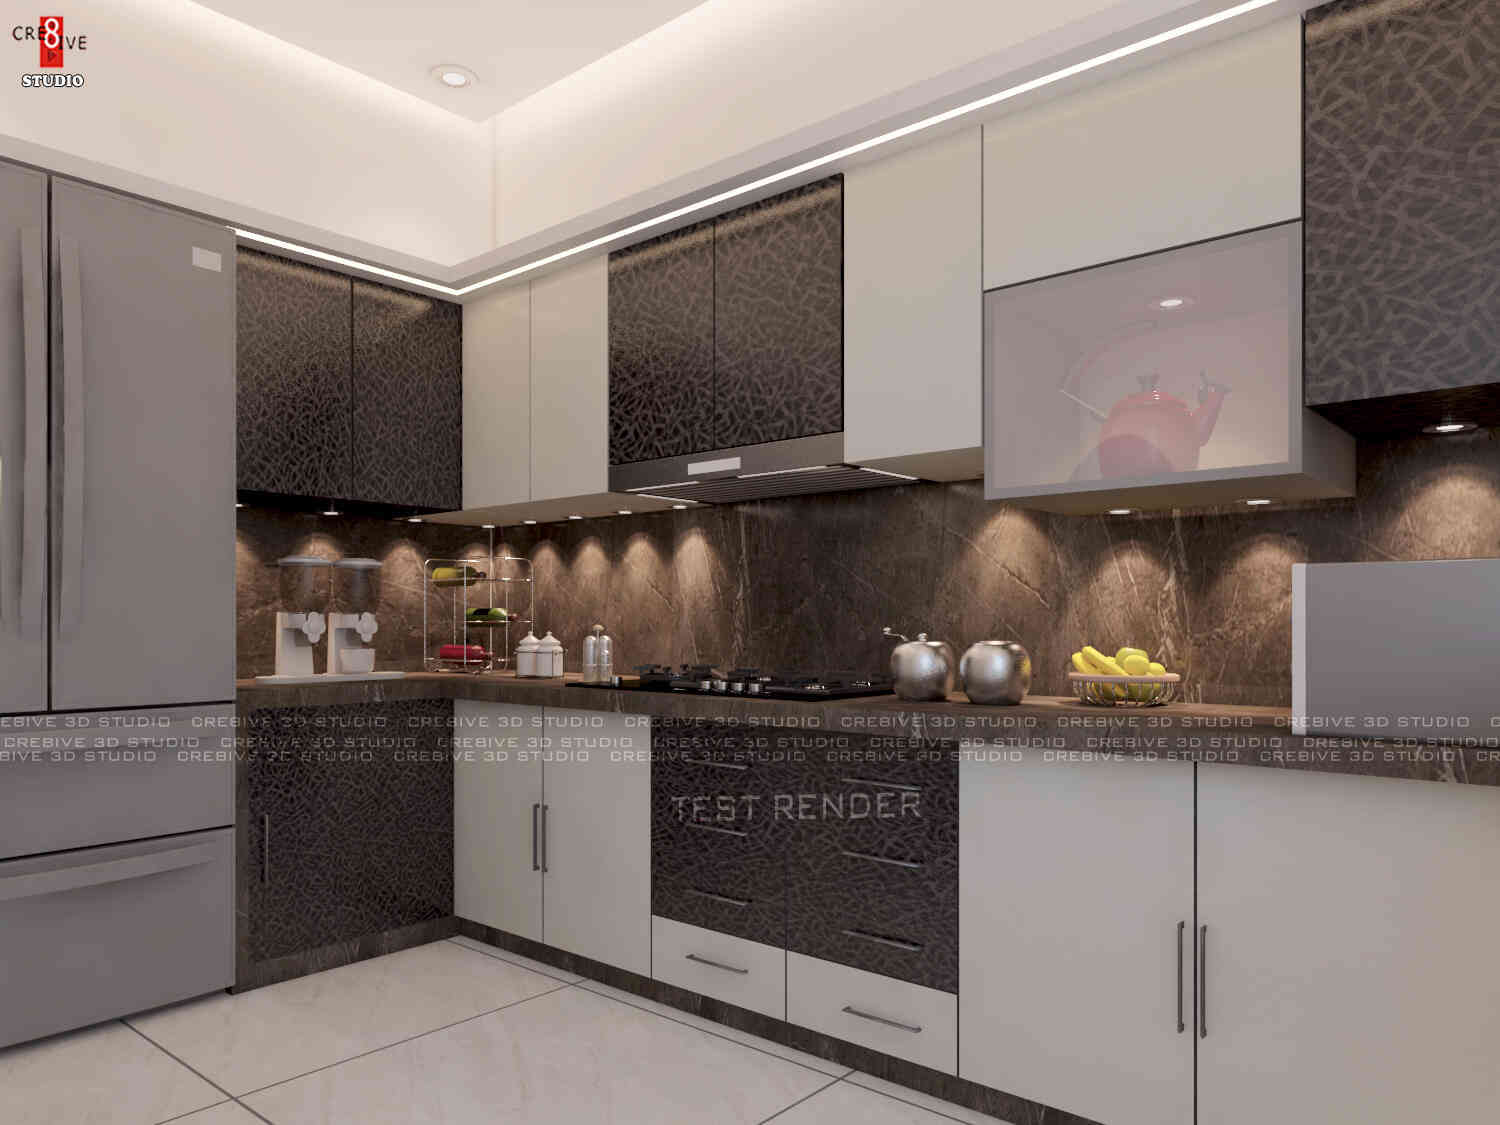 Modern L-Shaped Parallel Kitchen Design With A Glossy Finish